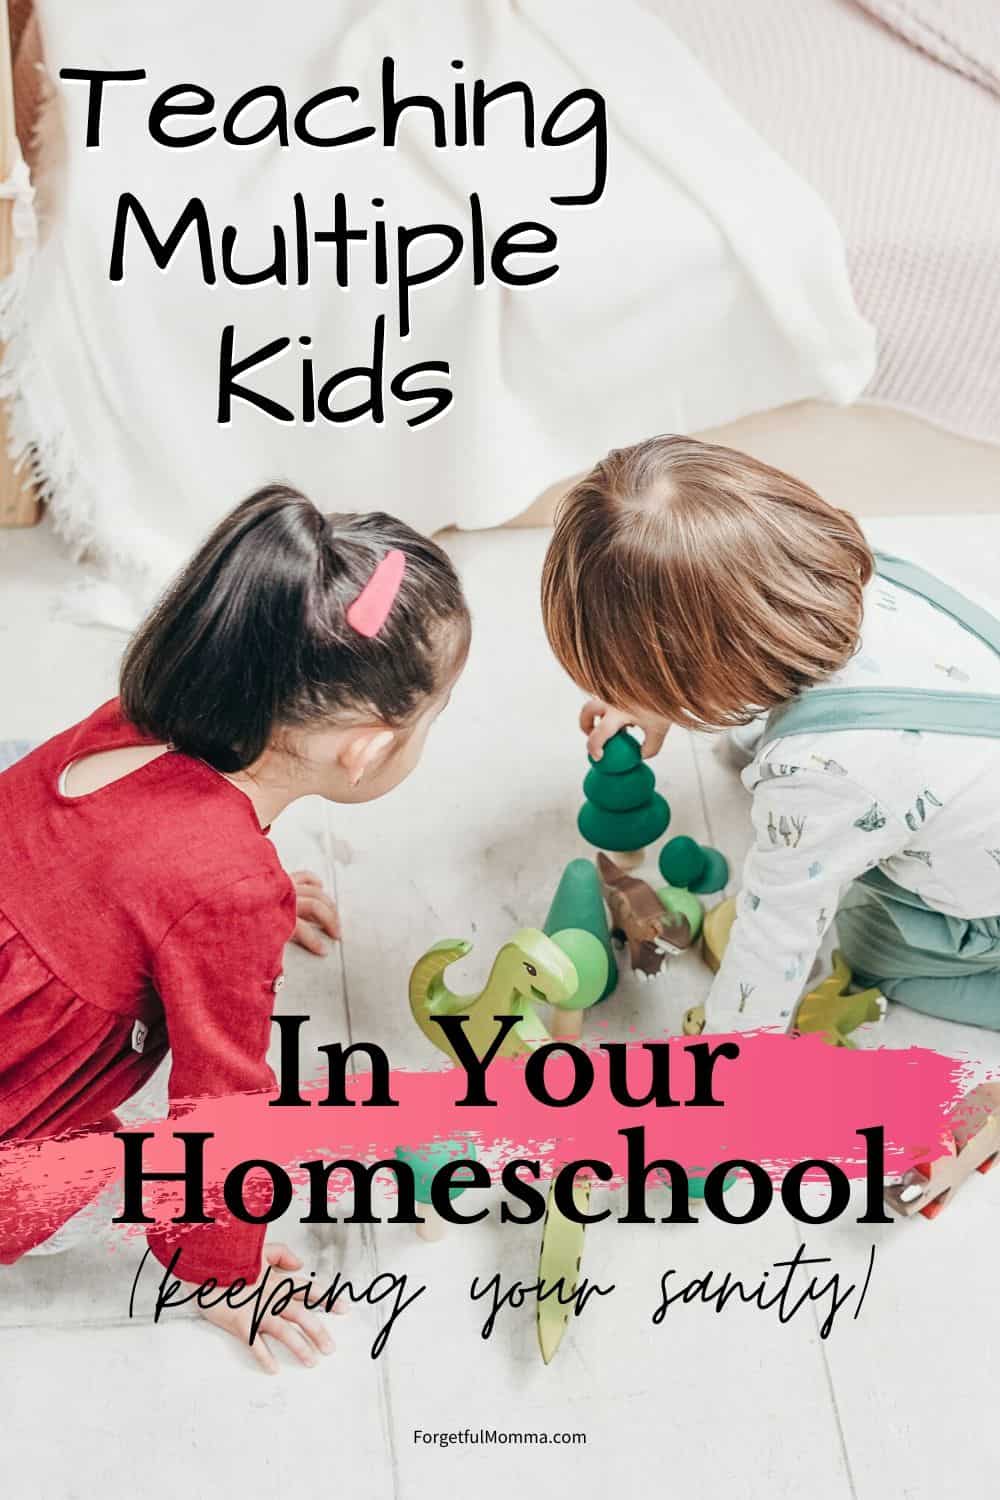 Homeschooling Multiple Kids with Ease - kids playing